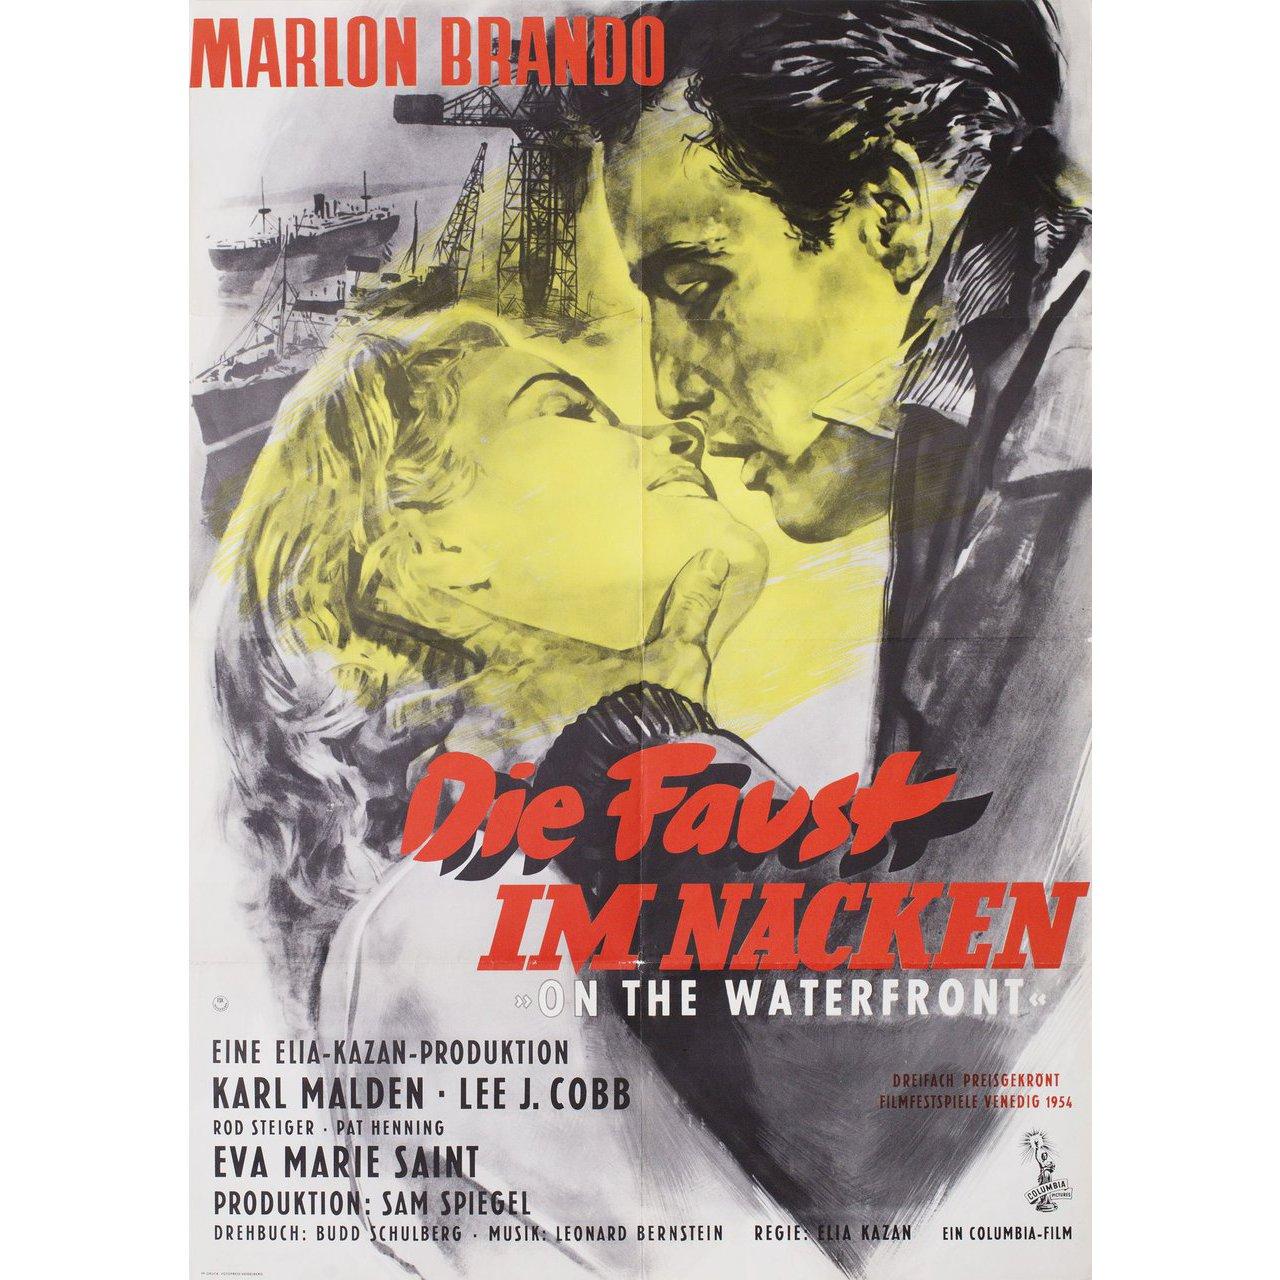 Original 1962 re-release German A1 poster by Ernst Litter for the 1954 film On the Waterfront directed by Elia Kazan with Marlon Brando / Karl Malden / Lee J. Cobb / Rod Steiger. Very good-fine condition, folded. Many original posters were issued